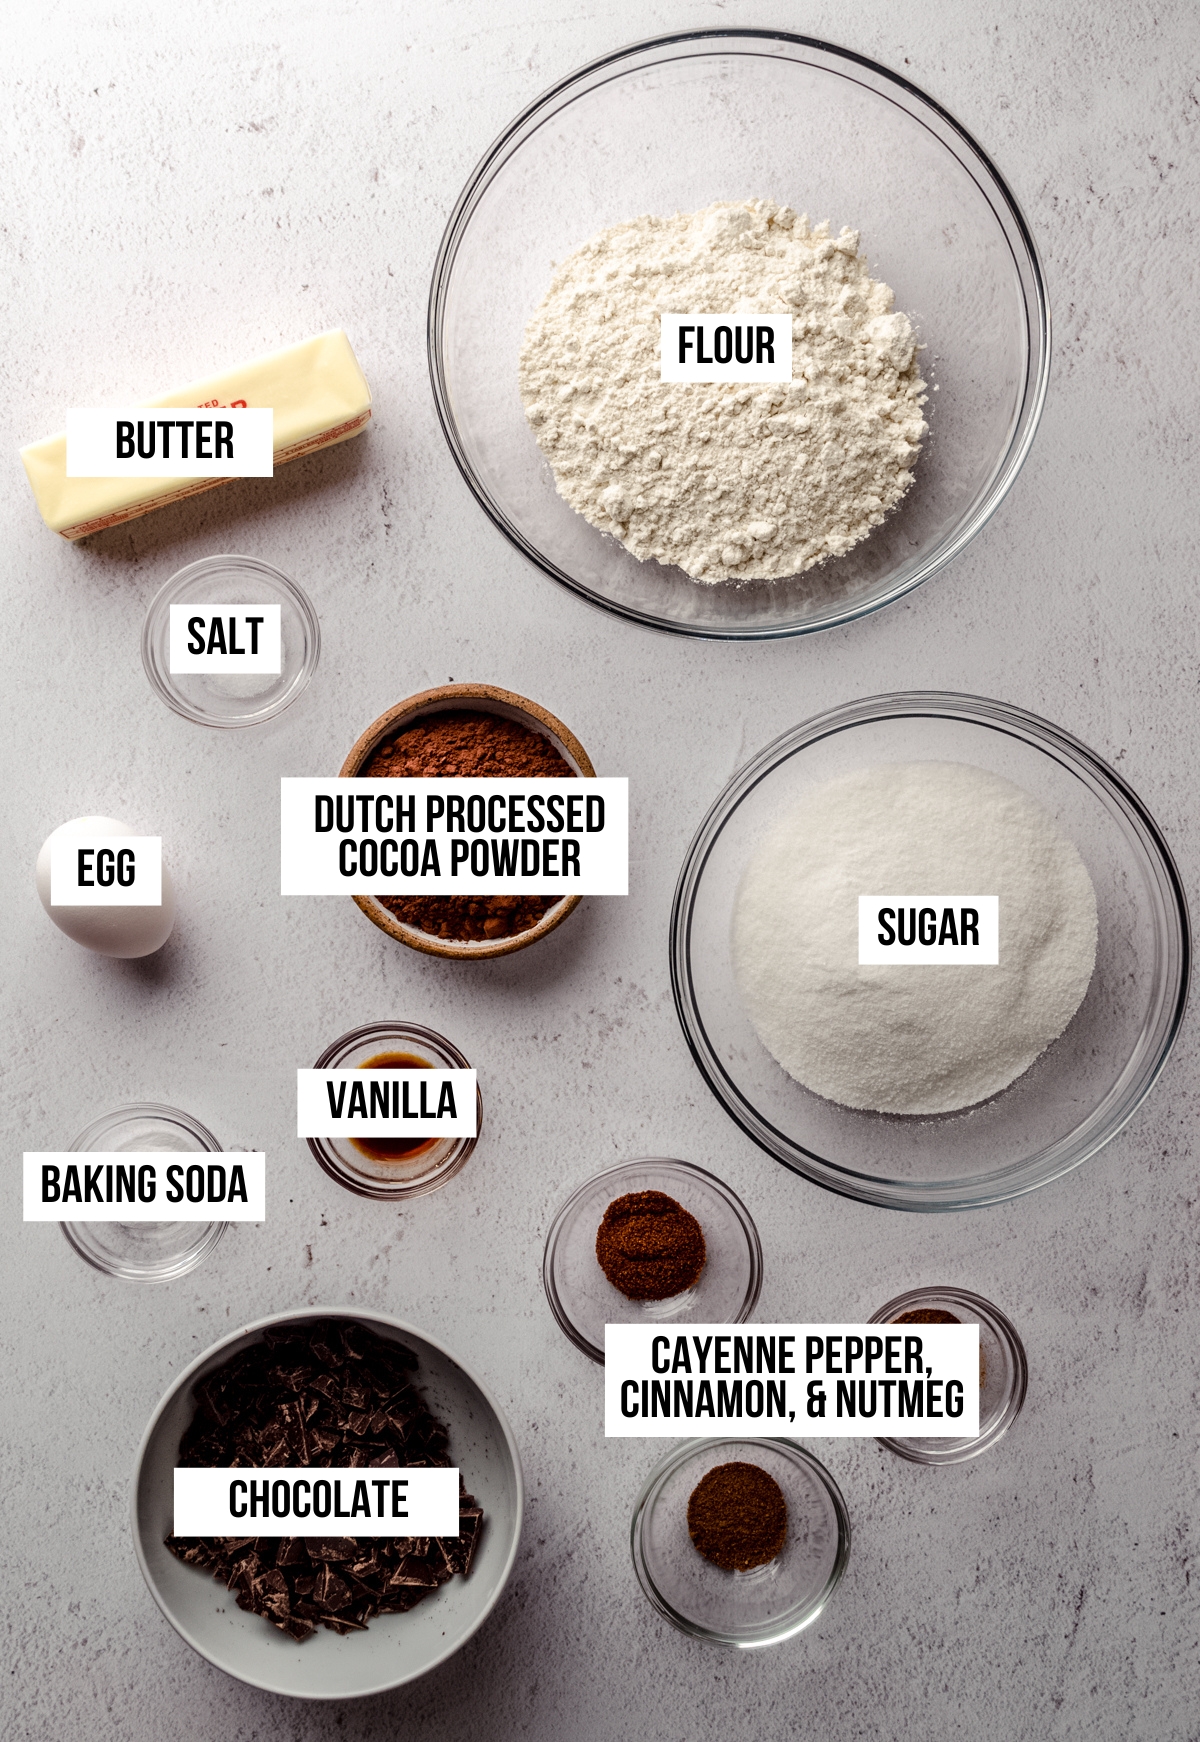 Arial photo of ingredients to make chocolate cayenne cookies with text overlay labeling each ingredient.